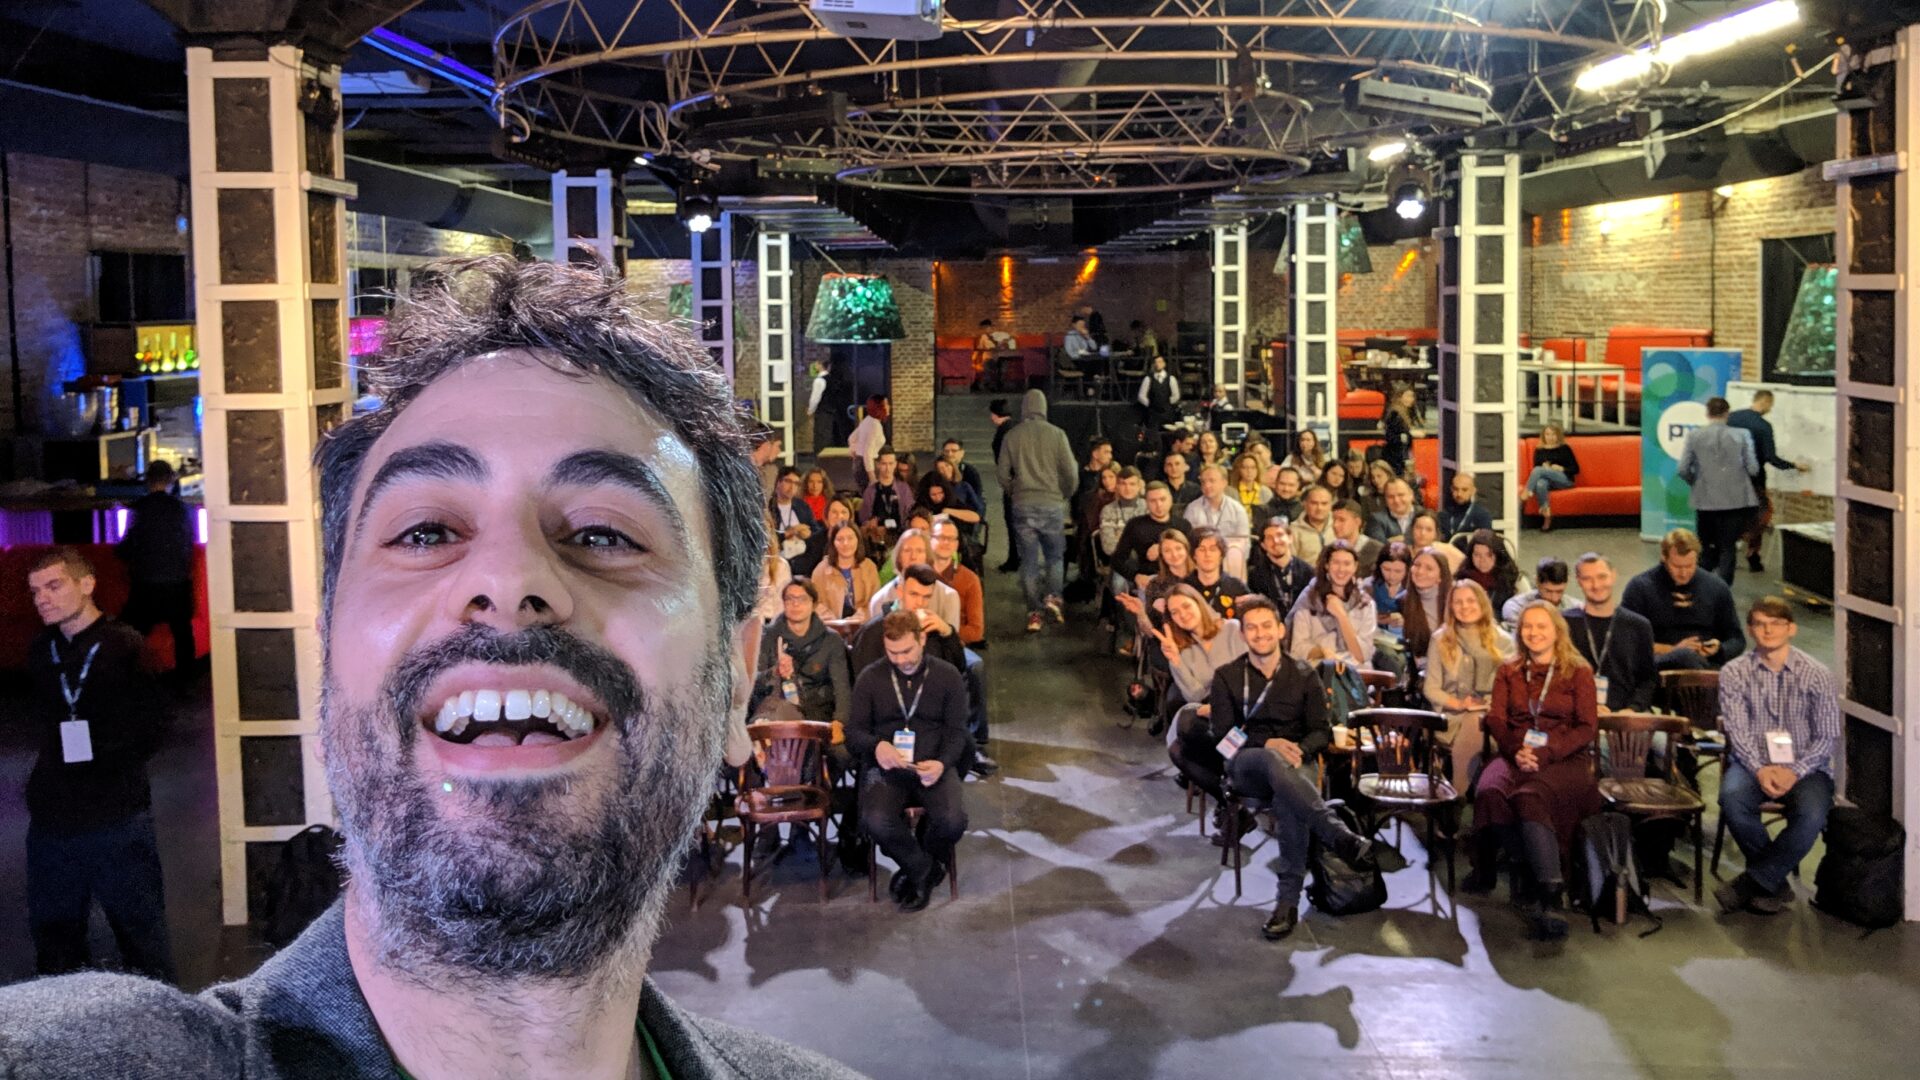 Jock Busuttil takes a selfie with the audience at ProductCamp L'viv in Ukraine in 2018